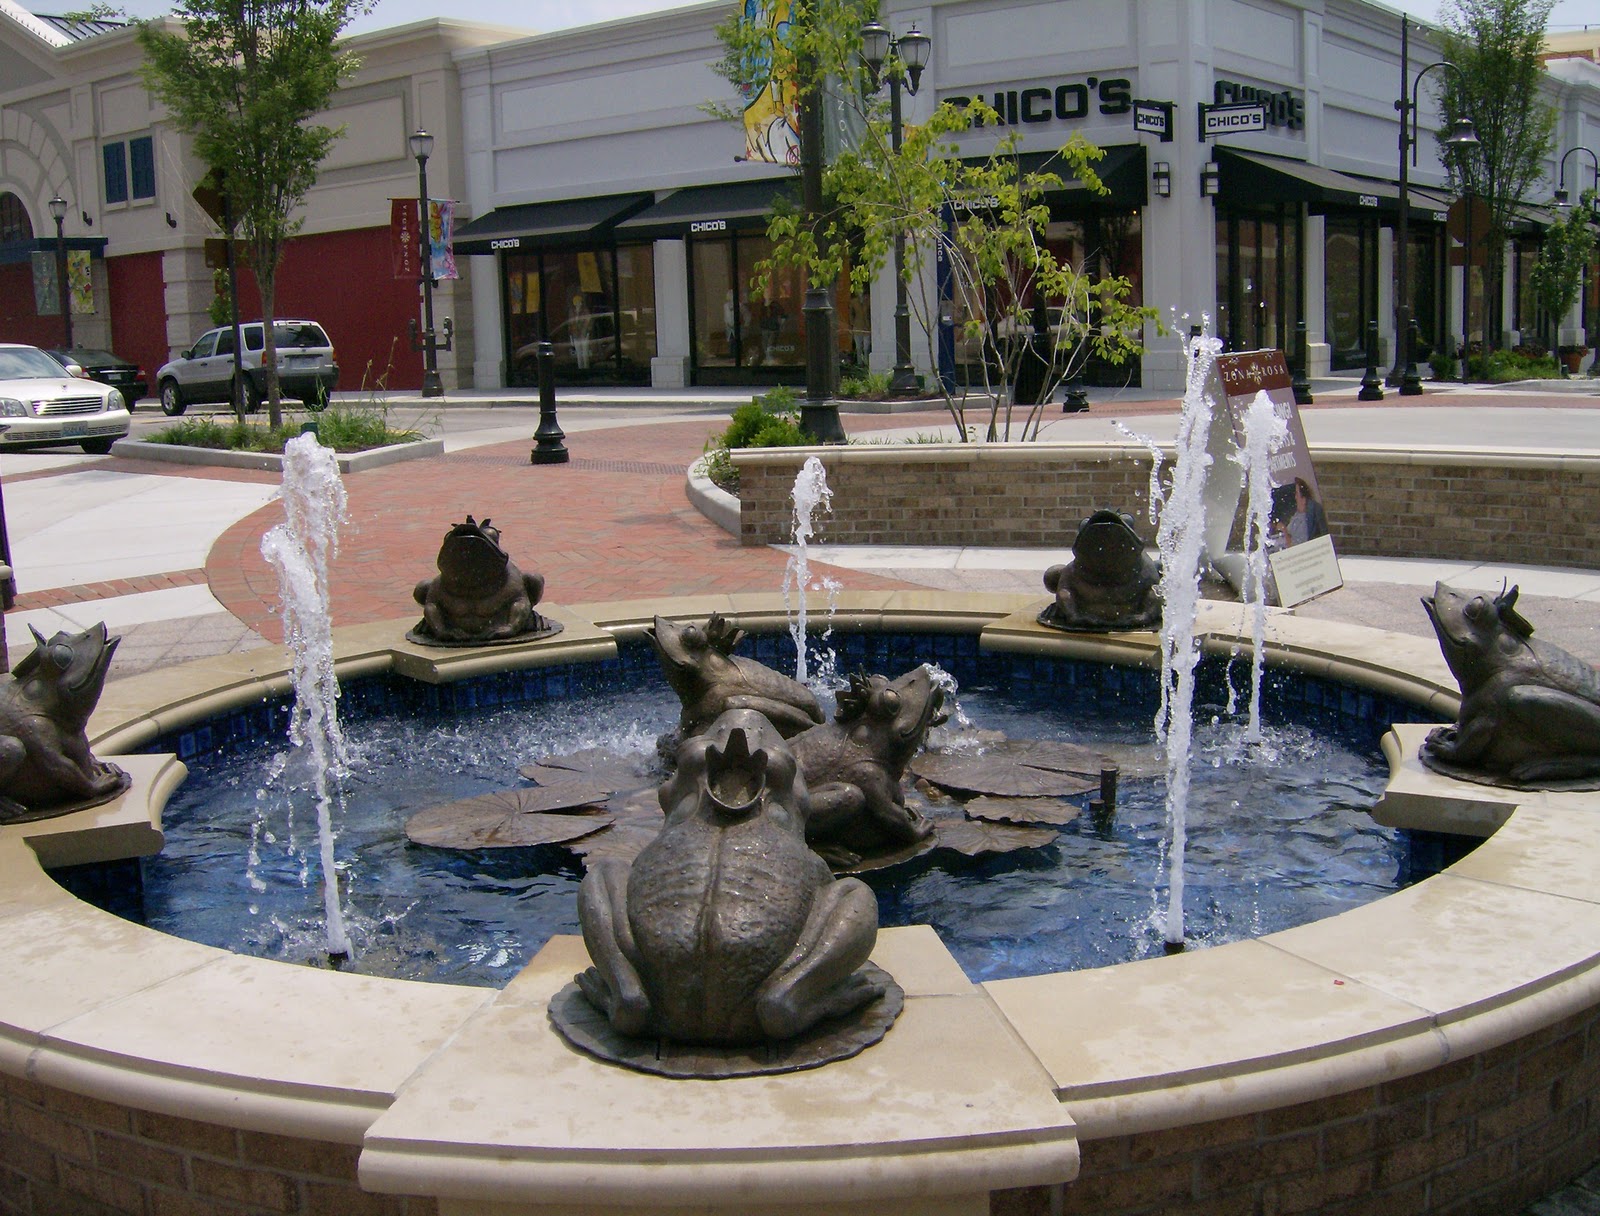 ... is located at Zona Rosa, another shopping district in Kansas City